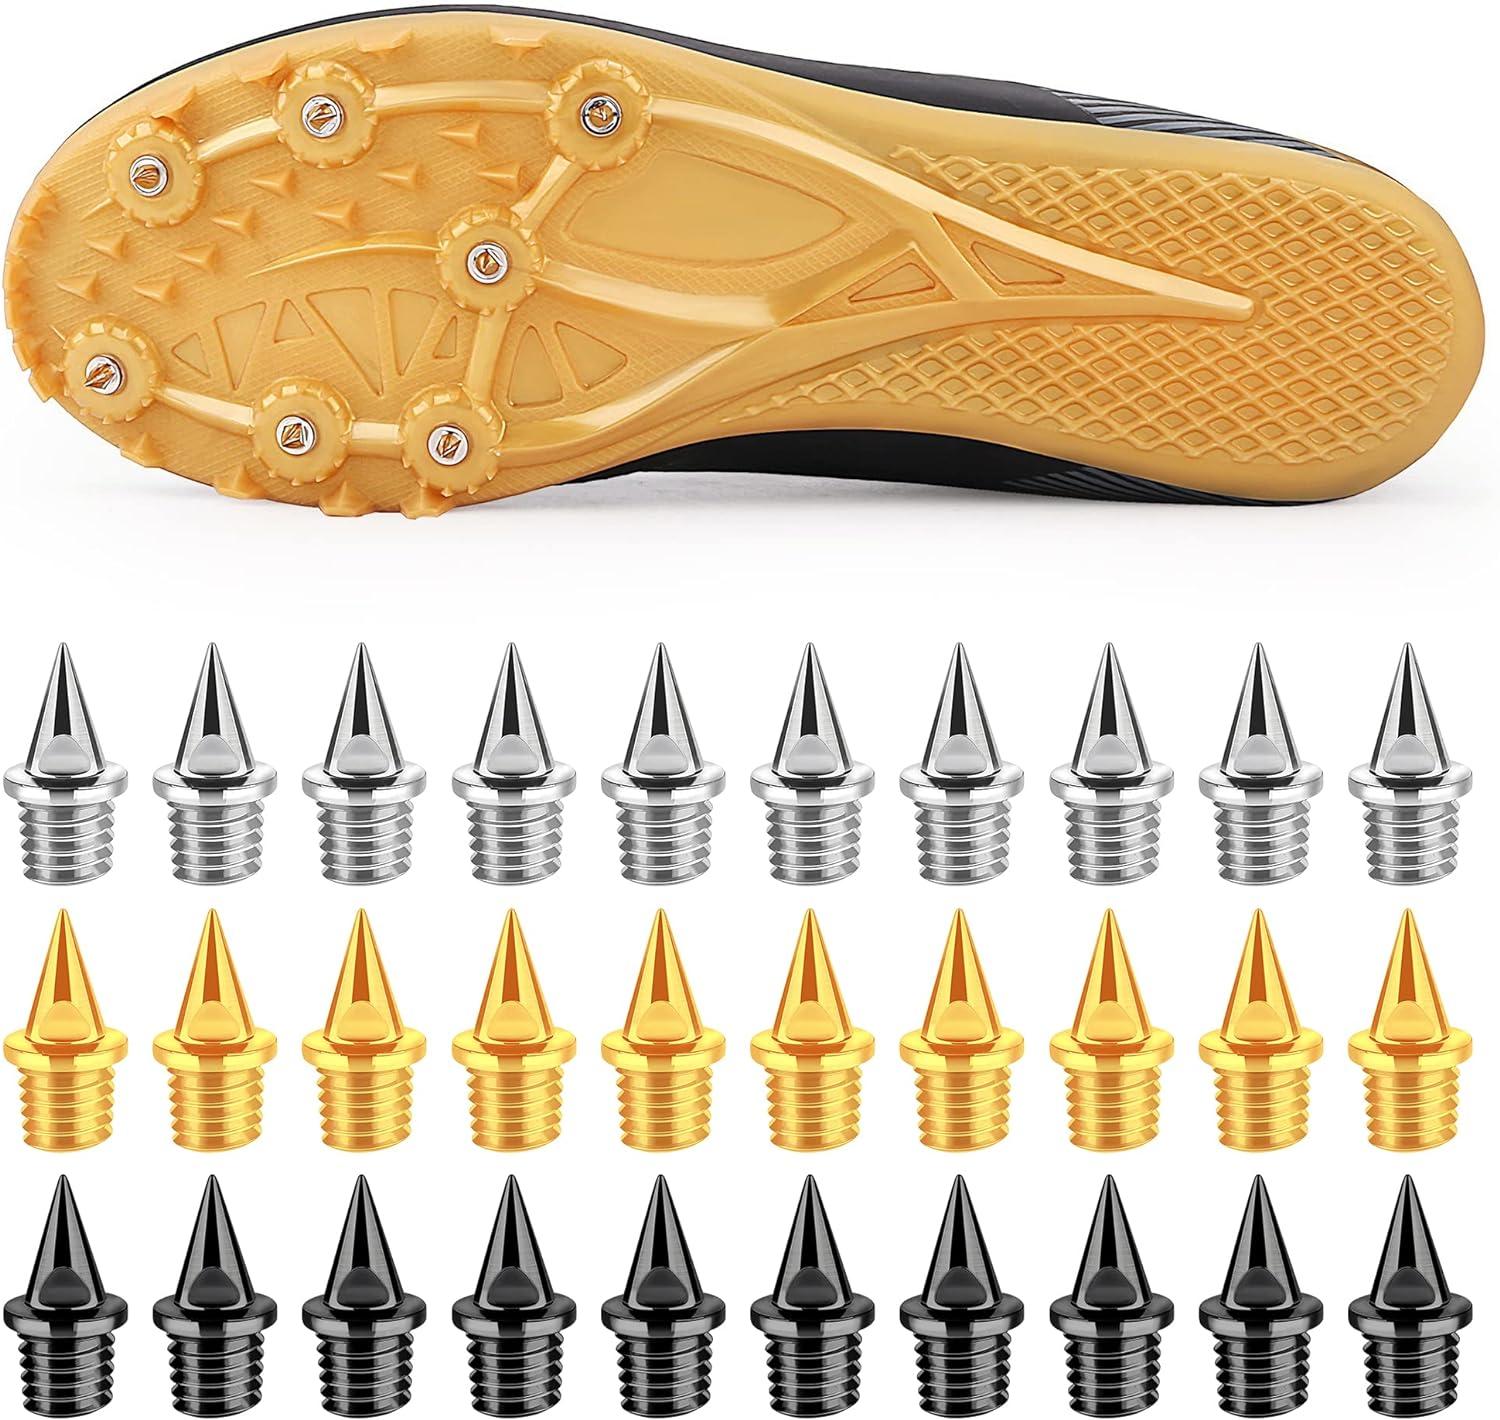 1/4 inch Track Spikes Pyramid, 120 Pieces Steel Spikes with Storage Box and  Small Wrench, Gold, Silver and Black Mixed Spikes for Youth Track Athletes